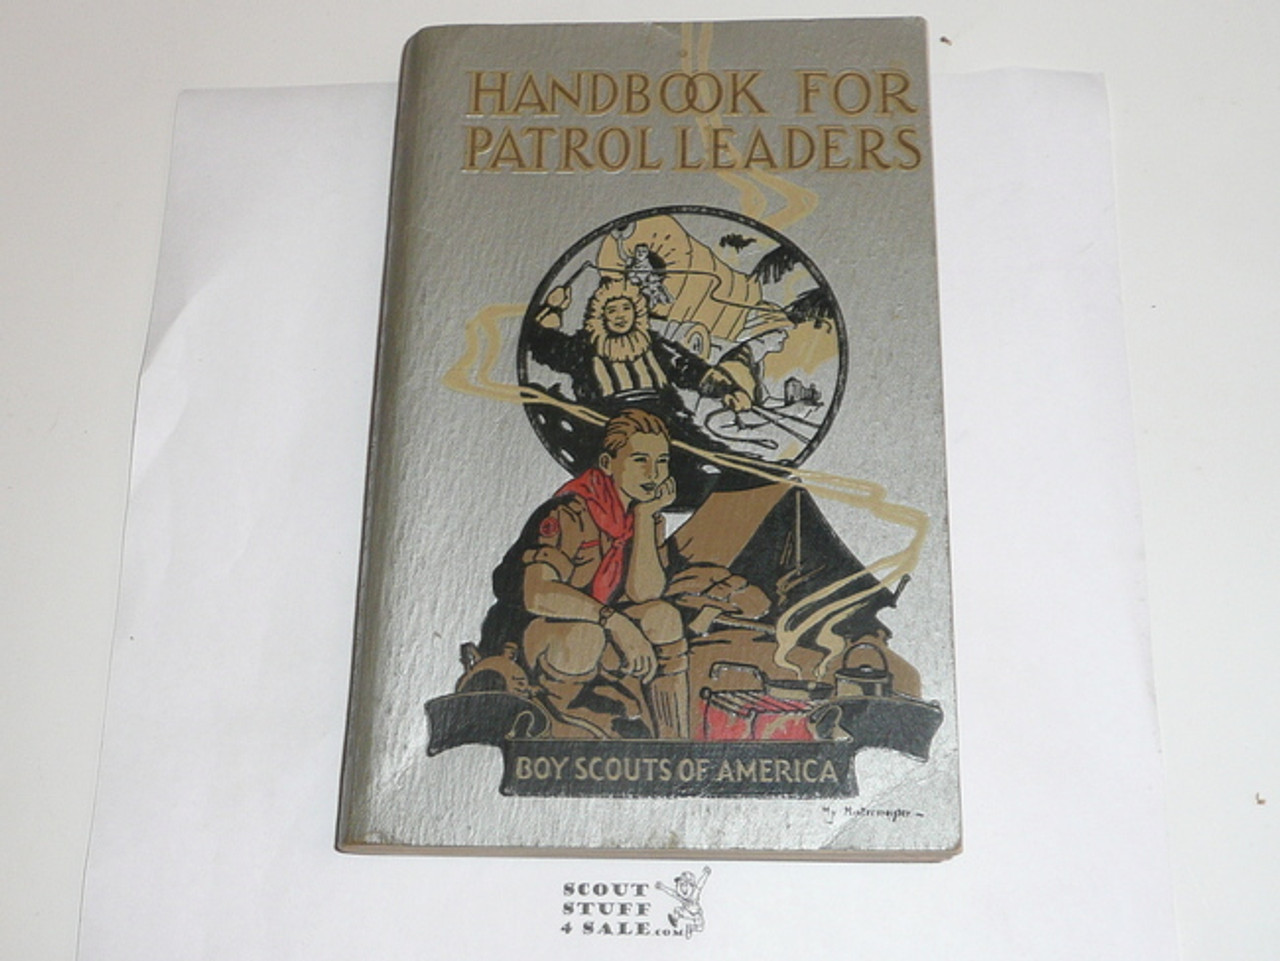 1945 Handbook For Patrol Leaders, First Edition, Fifteenth Printing, Very Good Condition